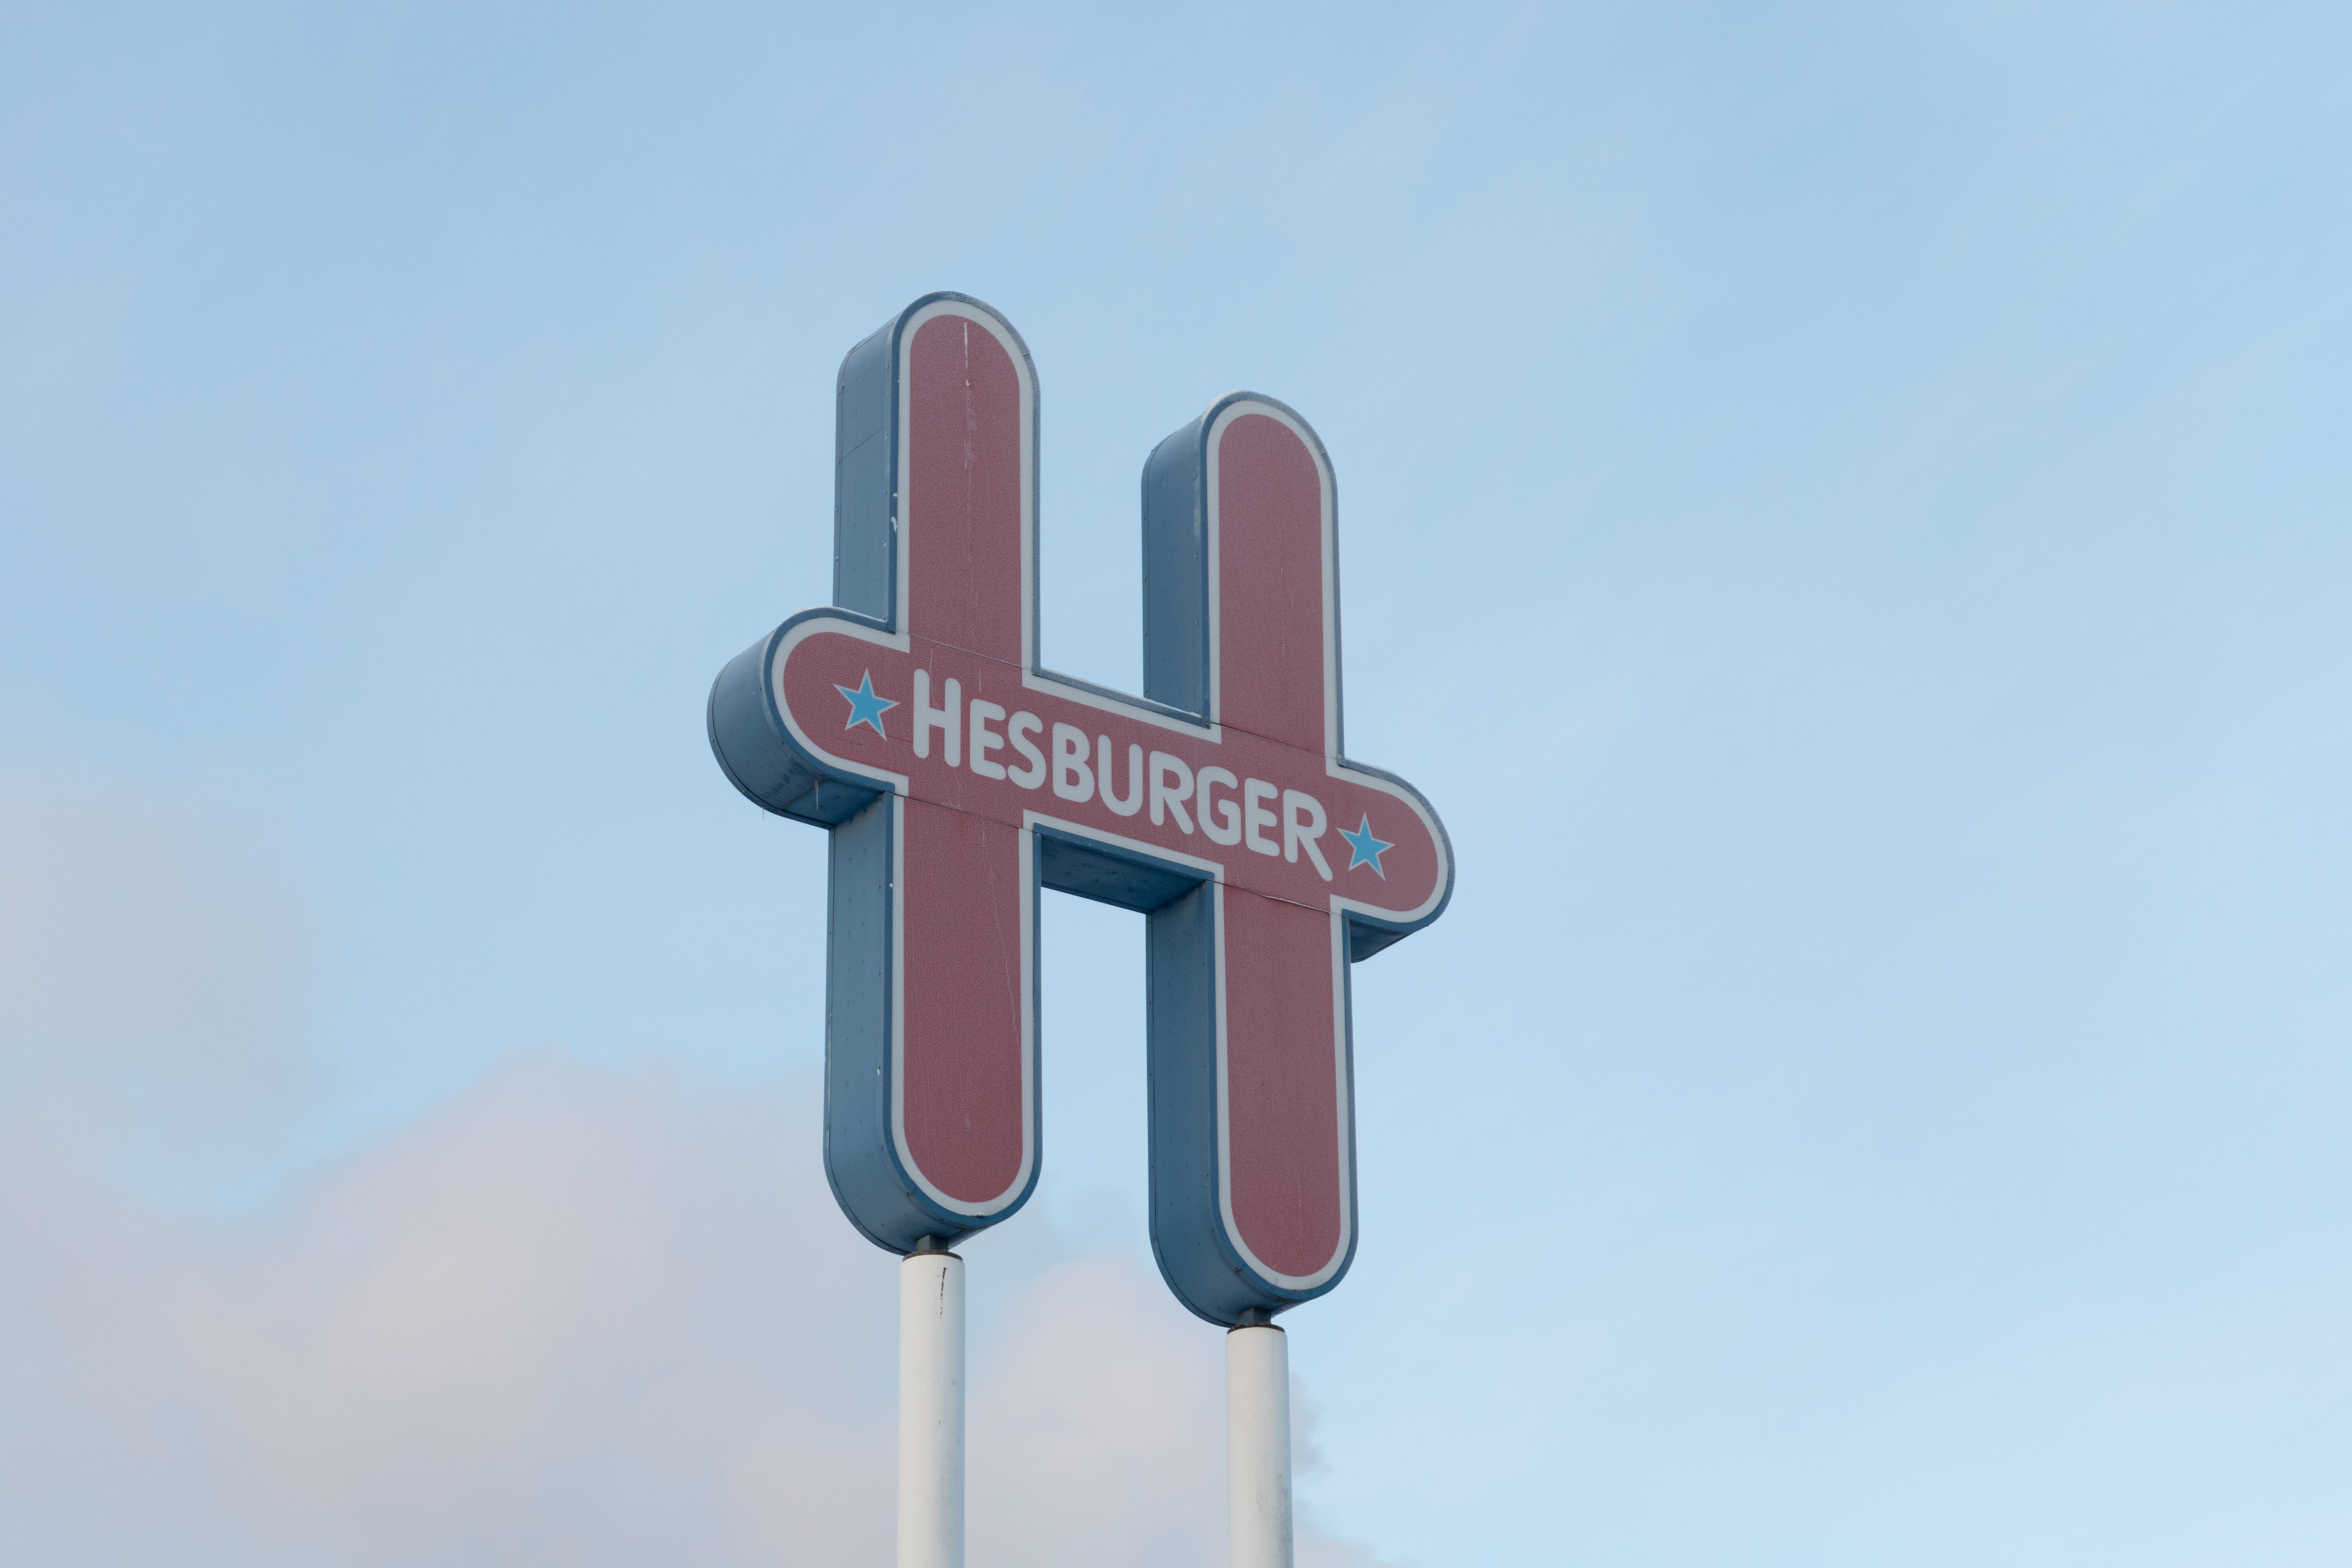 Hesburger: Closes all stores in Russia and Belarus "as soon as possible"